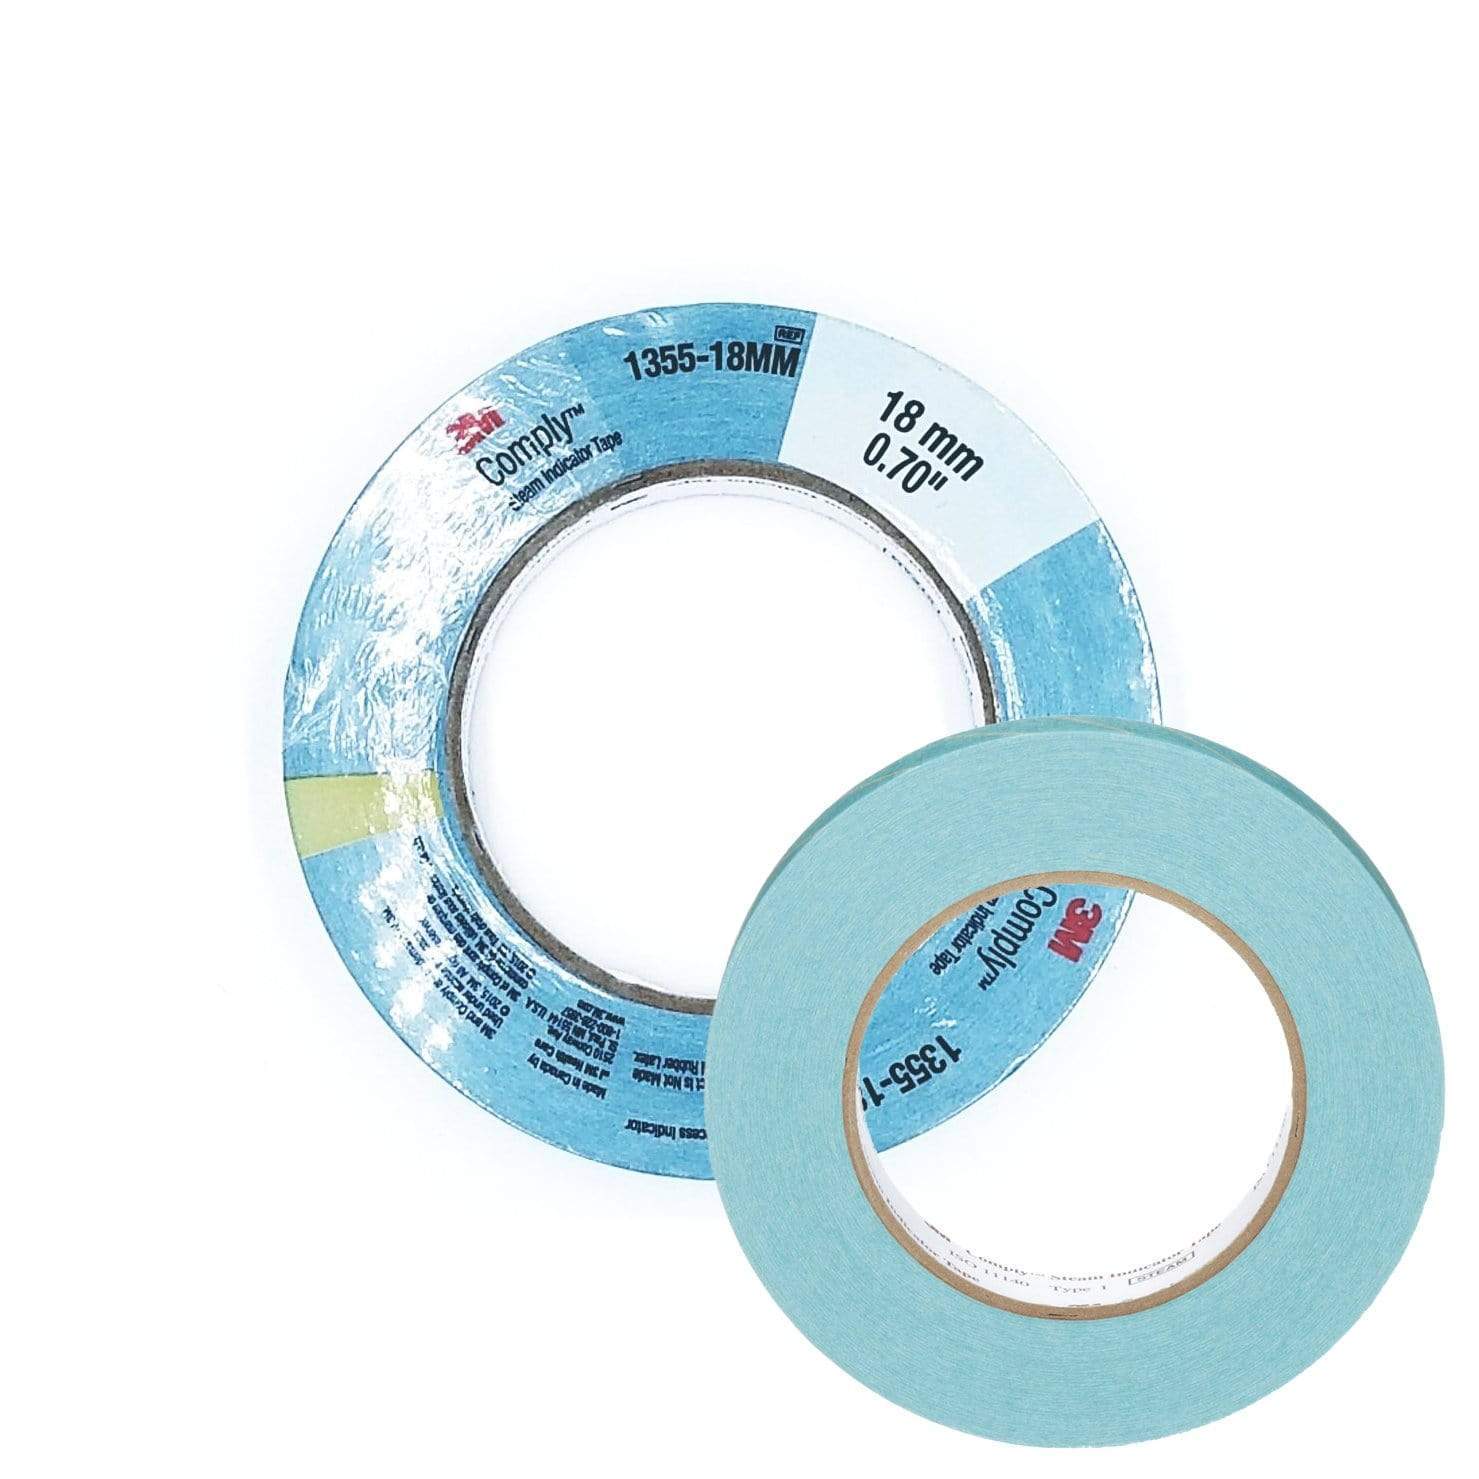 3M Comply Steam Process Indicator Tape for Disposable Synthetic Non-Woven Wraps